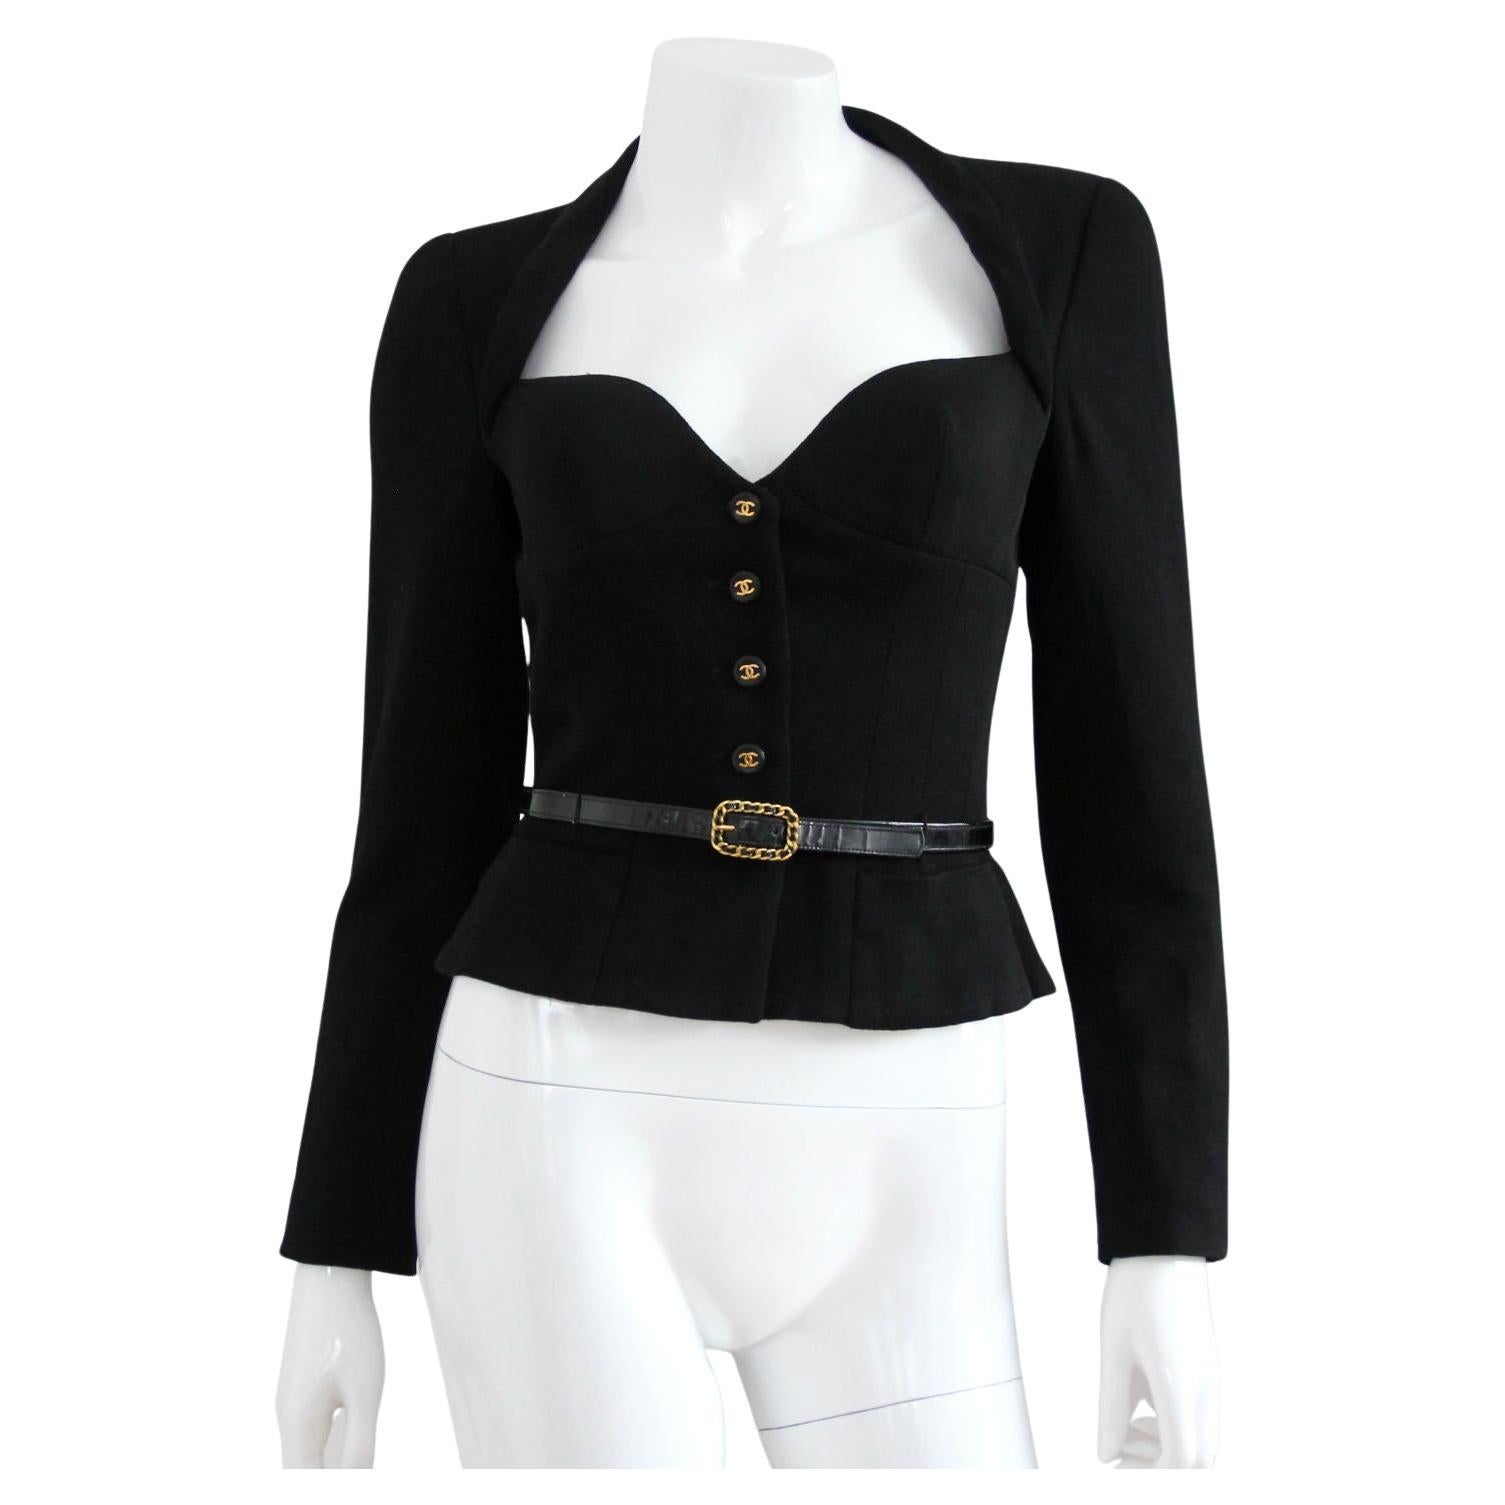 CHANEL 1995 Black Jacket with Patent Leather Belt & CC Buttons by Karl Lagerfeld